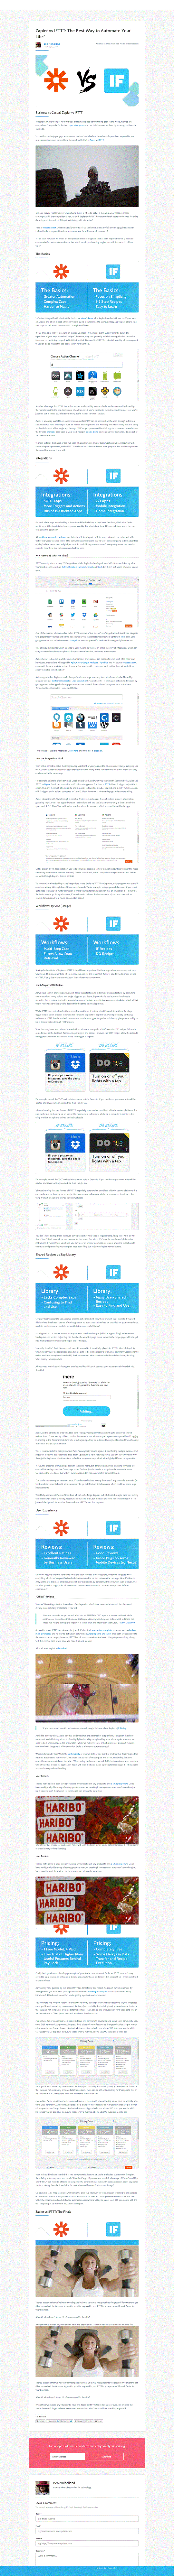 Zapier vs IFTTT: The Best Way to Automate Your Life? Infographic